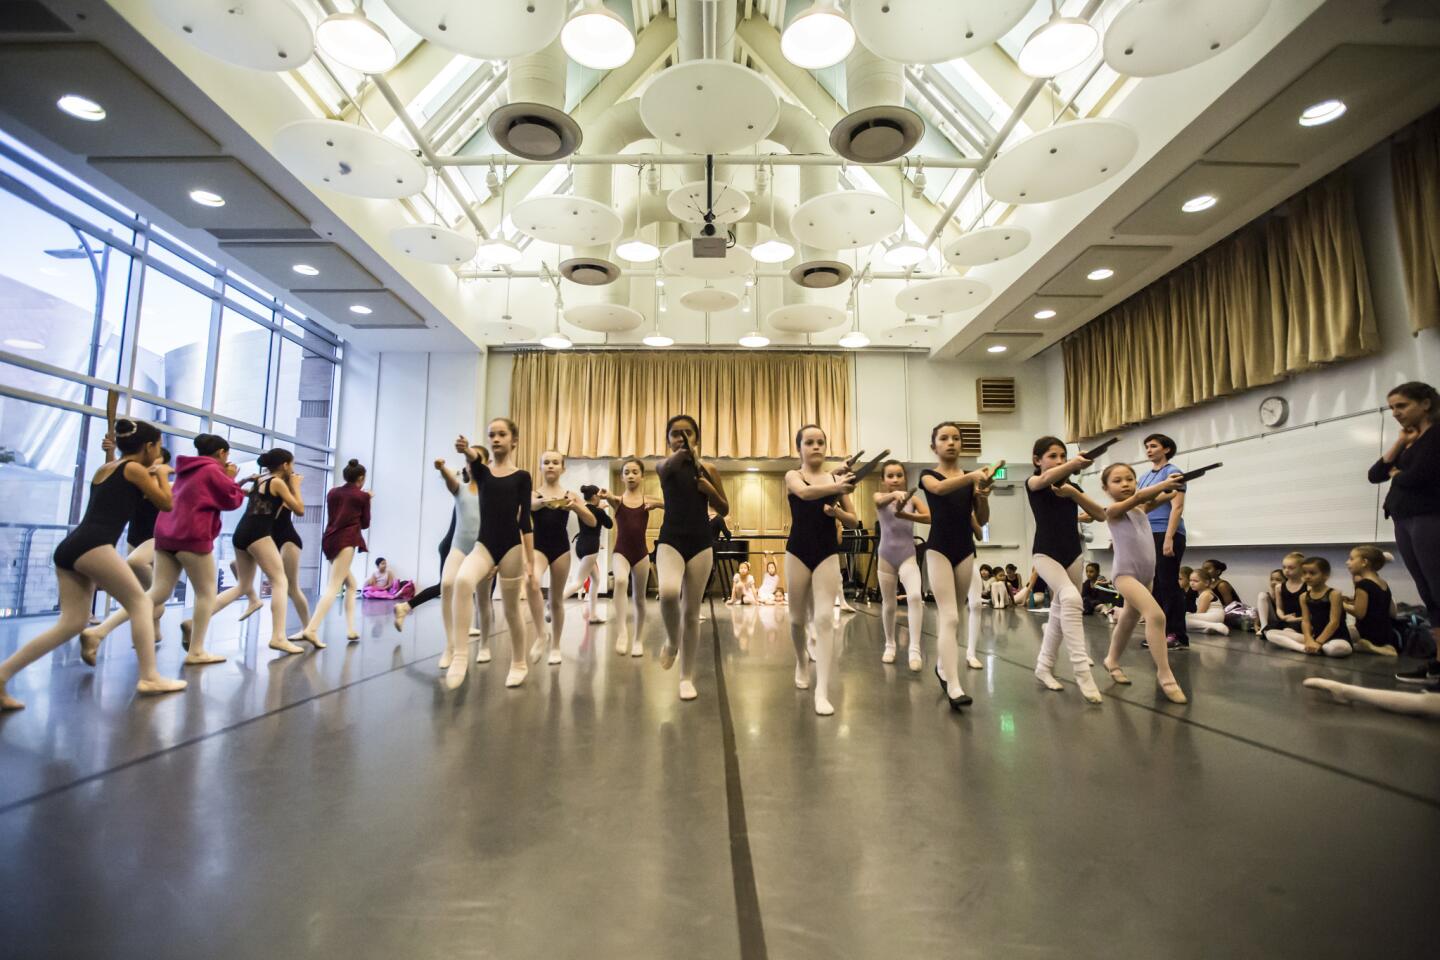 The Music Center in Los Angeles is staging Miami City Ballet’s “The Nutcracker” with Colburn School and Gabriella Foundation dancers.